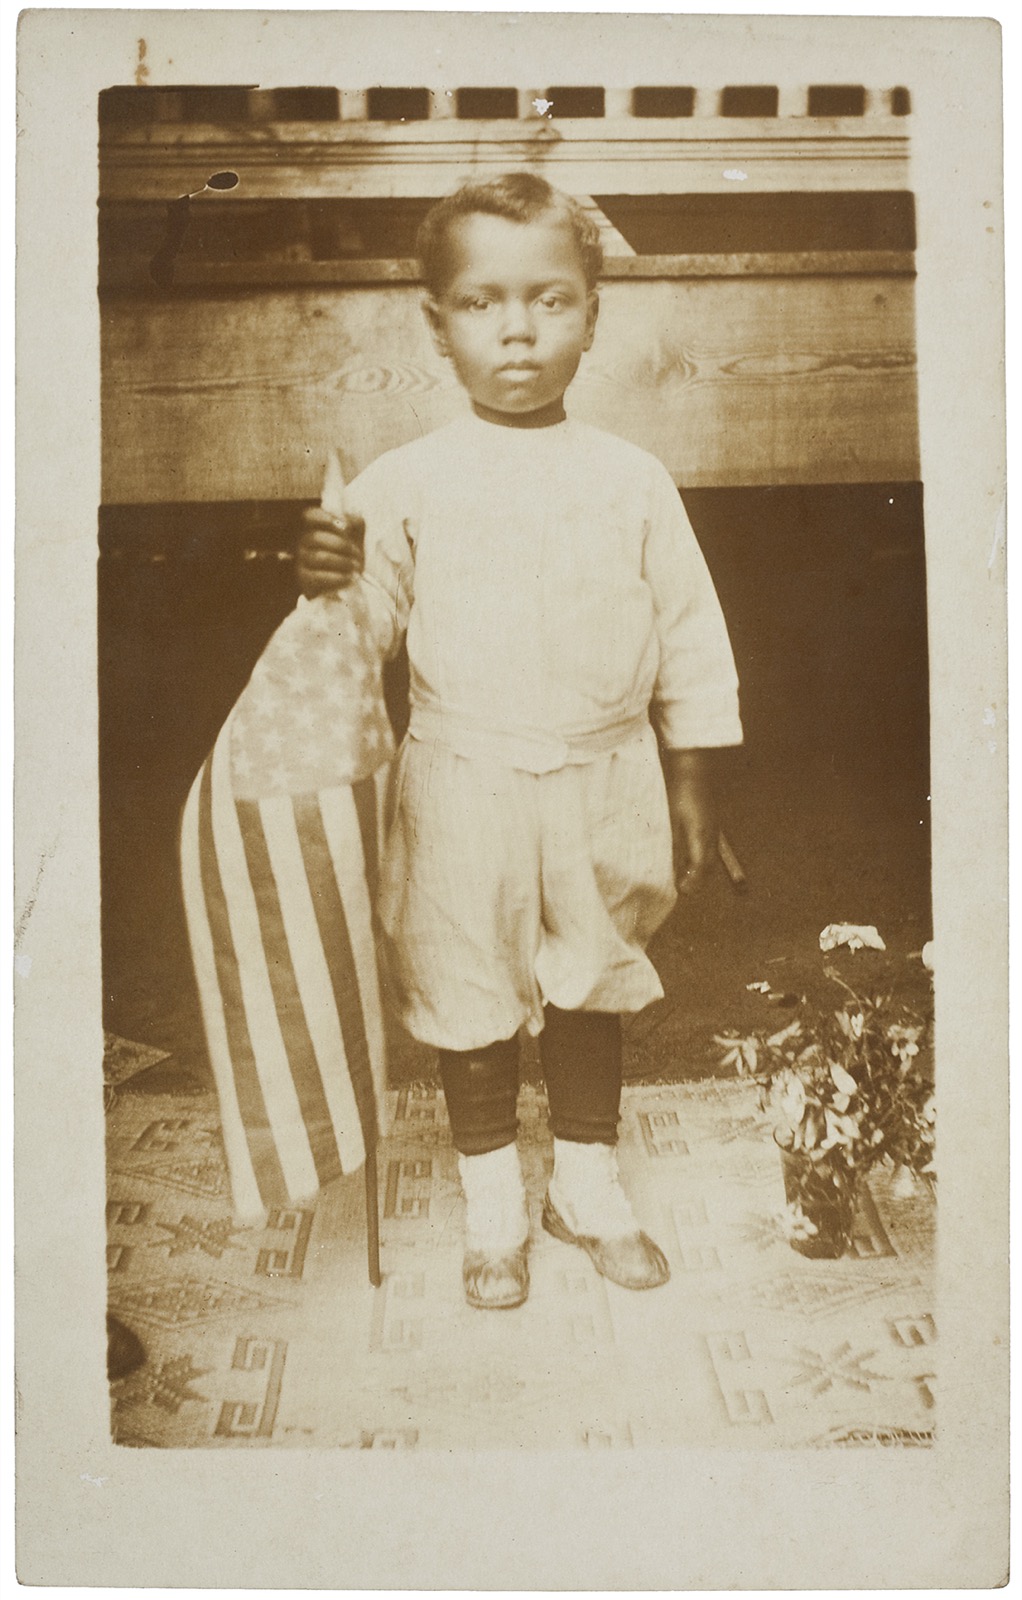 “Black Boy with Flag,” from the Robert L. Scott Collection of 19th and 20th Century African American Vernacular Photography